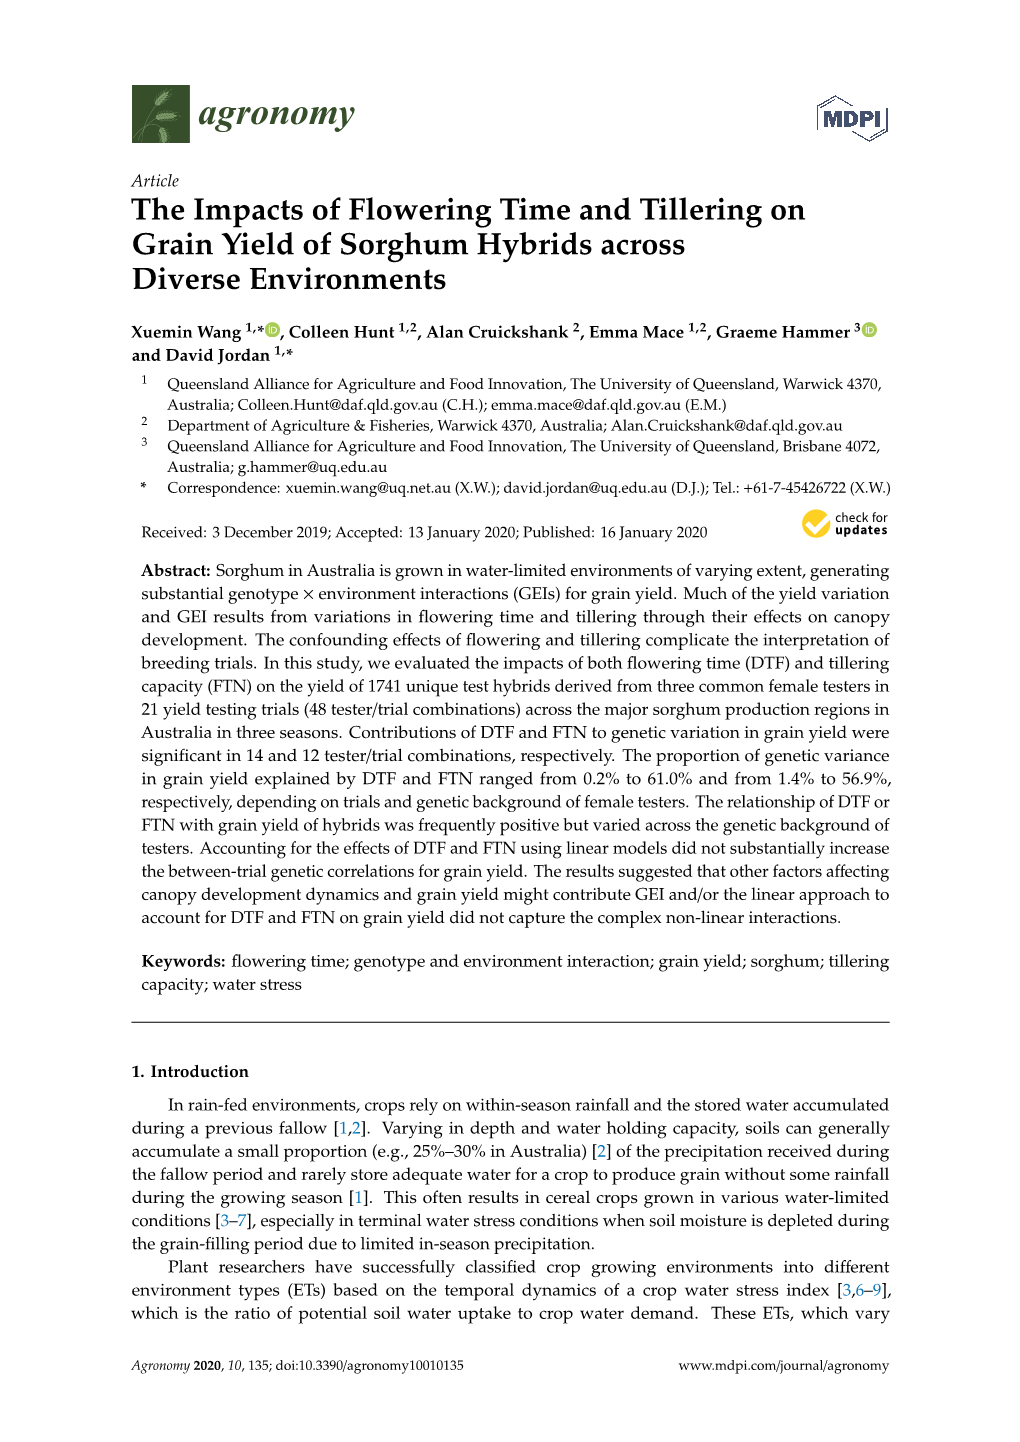 The Impacts of Flowering Time and Tillering on Grain Yield of Sorghum Hybrids Across Diverse Environments